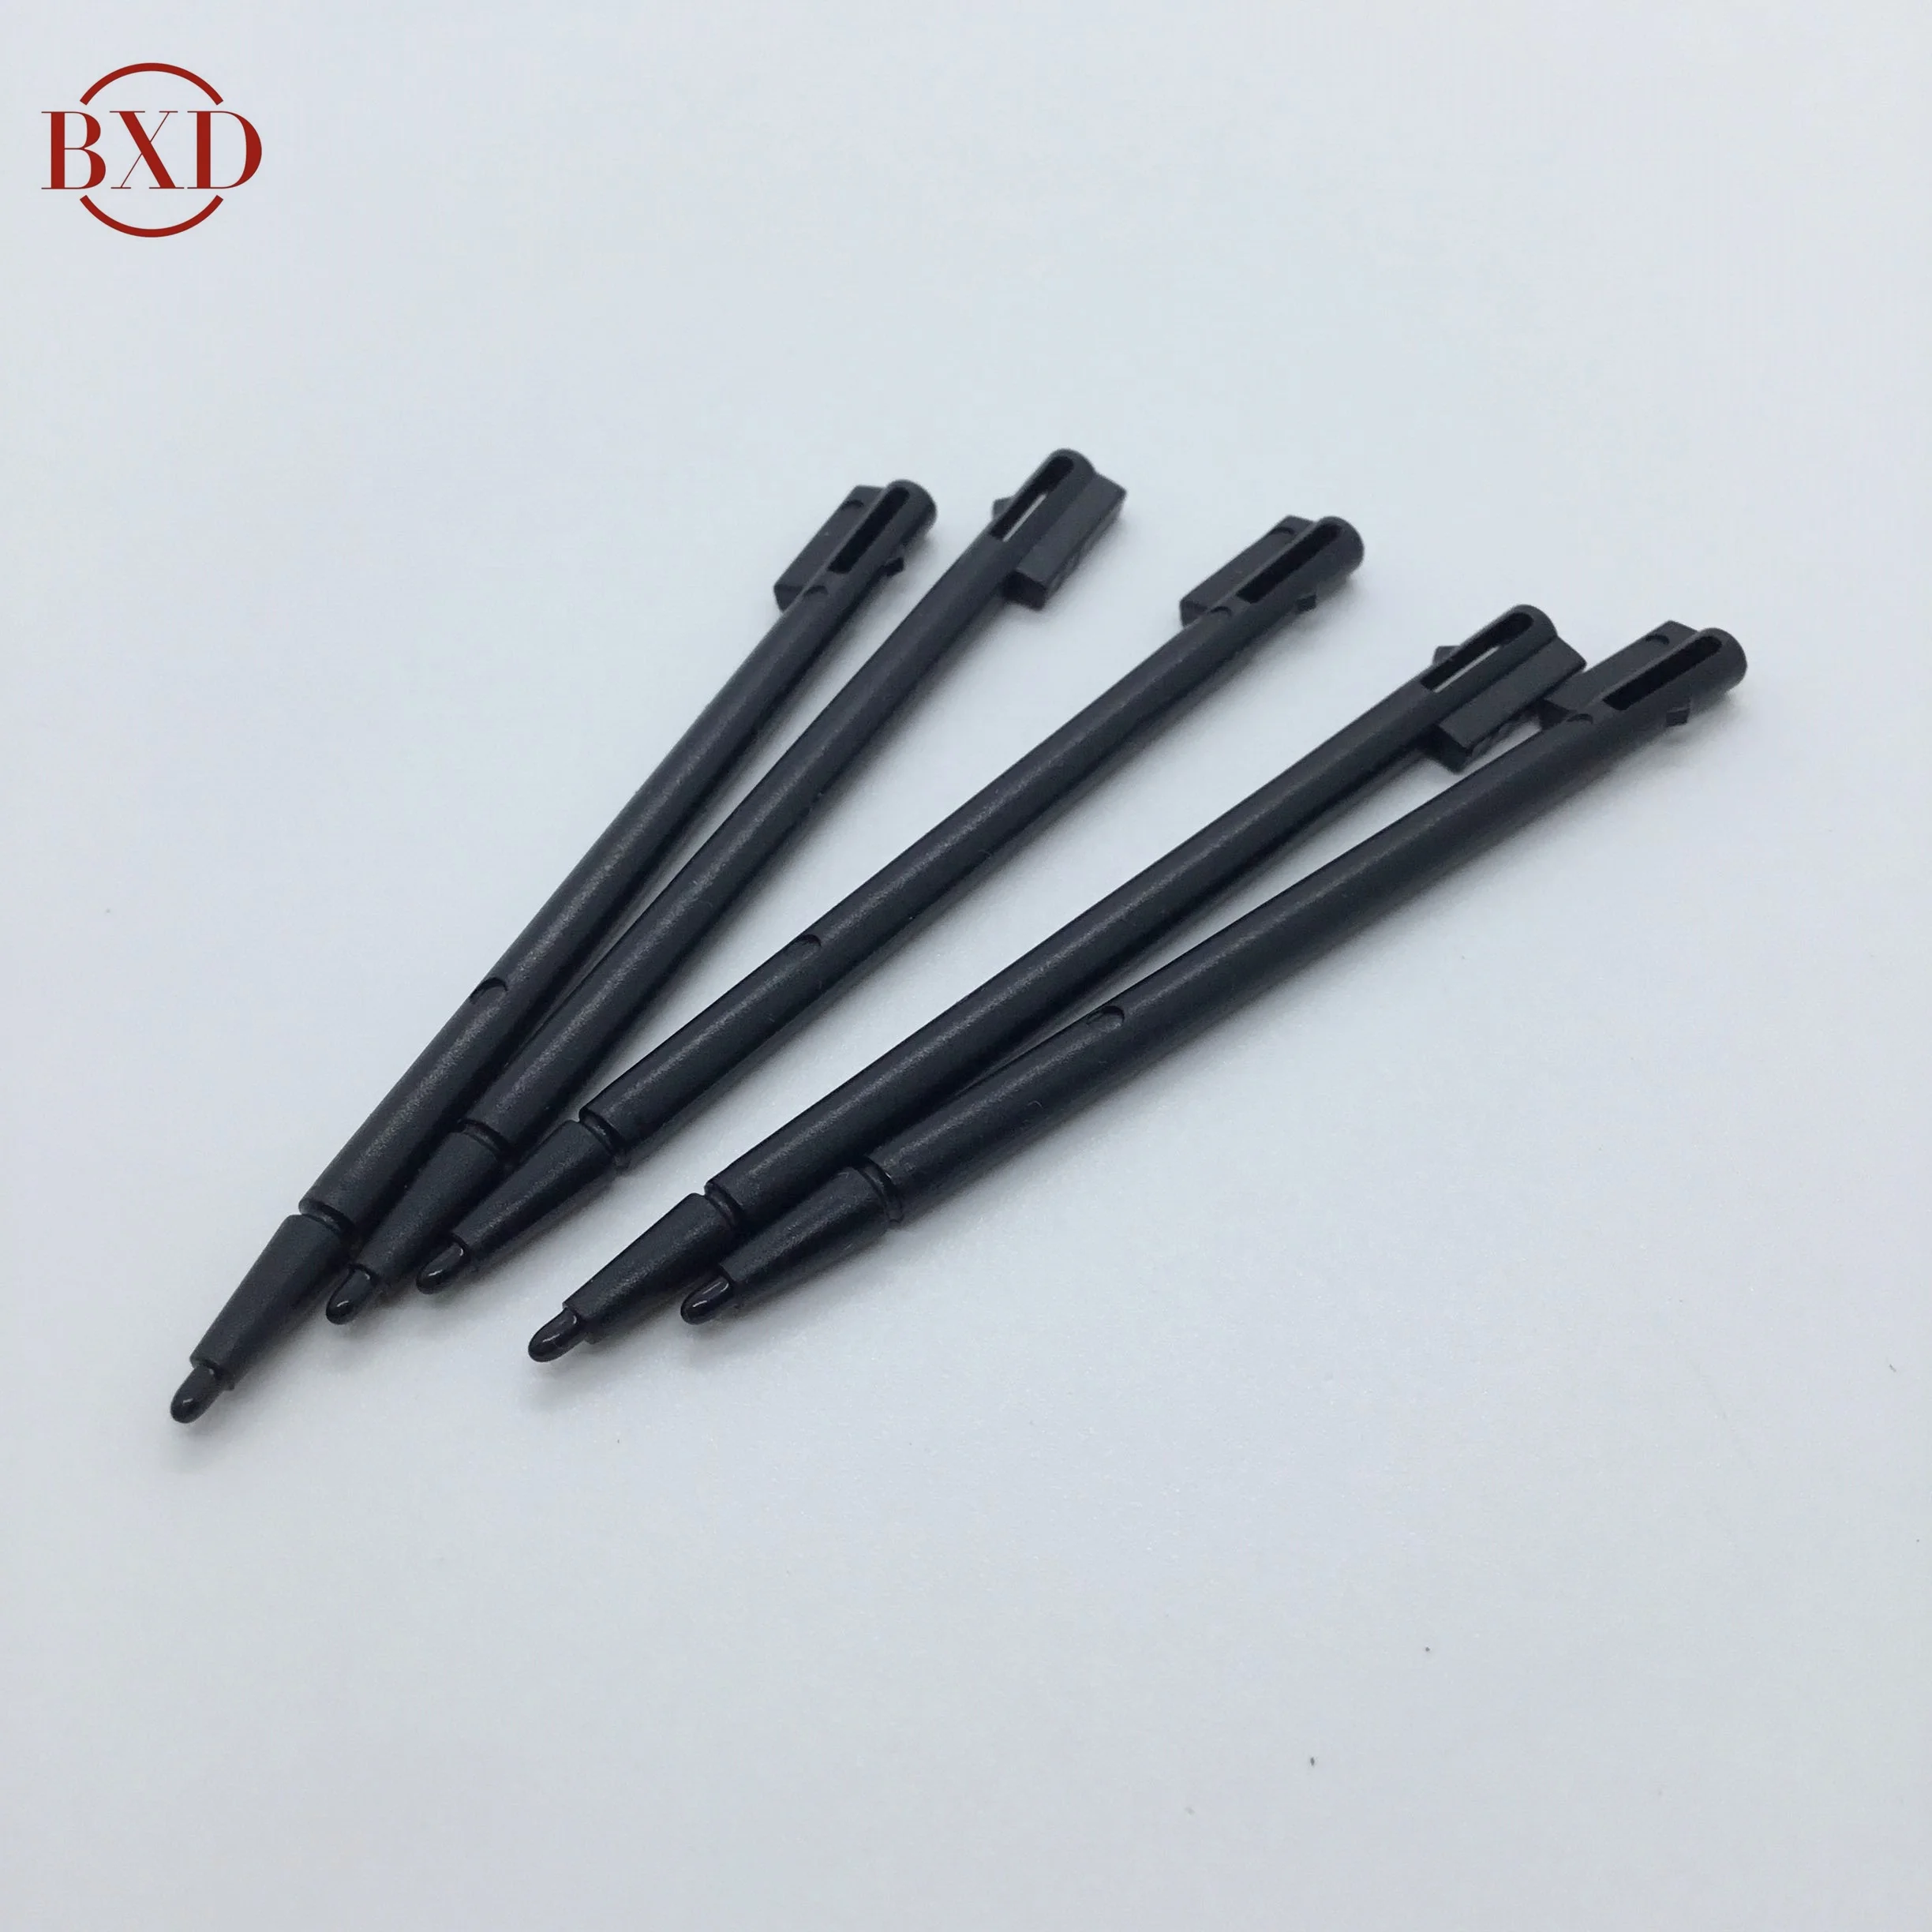 Stylus For Nintendo Ds Touch Pen For Nds Replacement - Buy Stylus For Nintendo  Ds,For Nintendo Ds,Pen For Nds Product on Alibaba.com